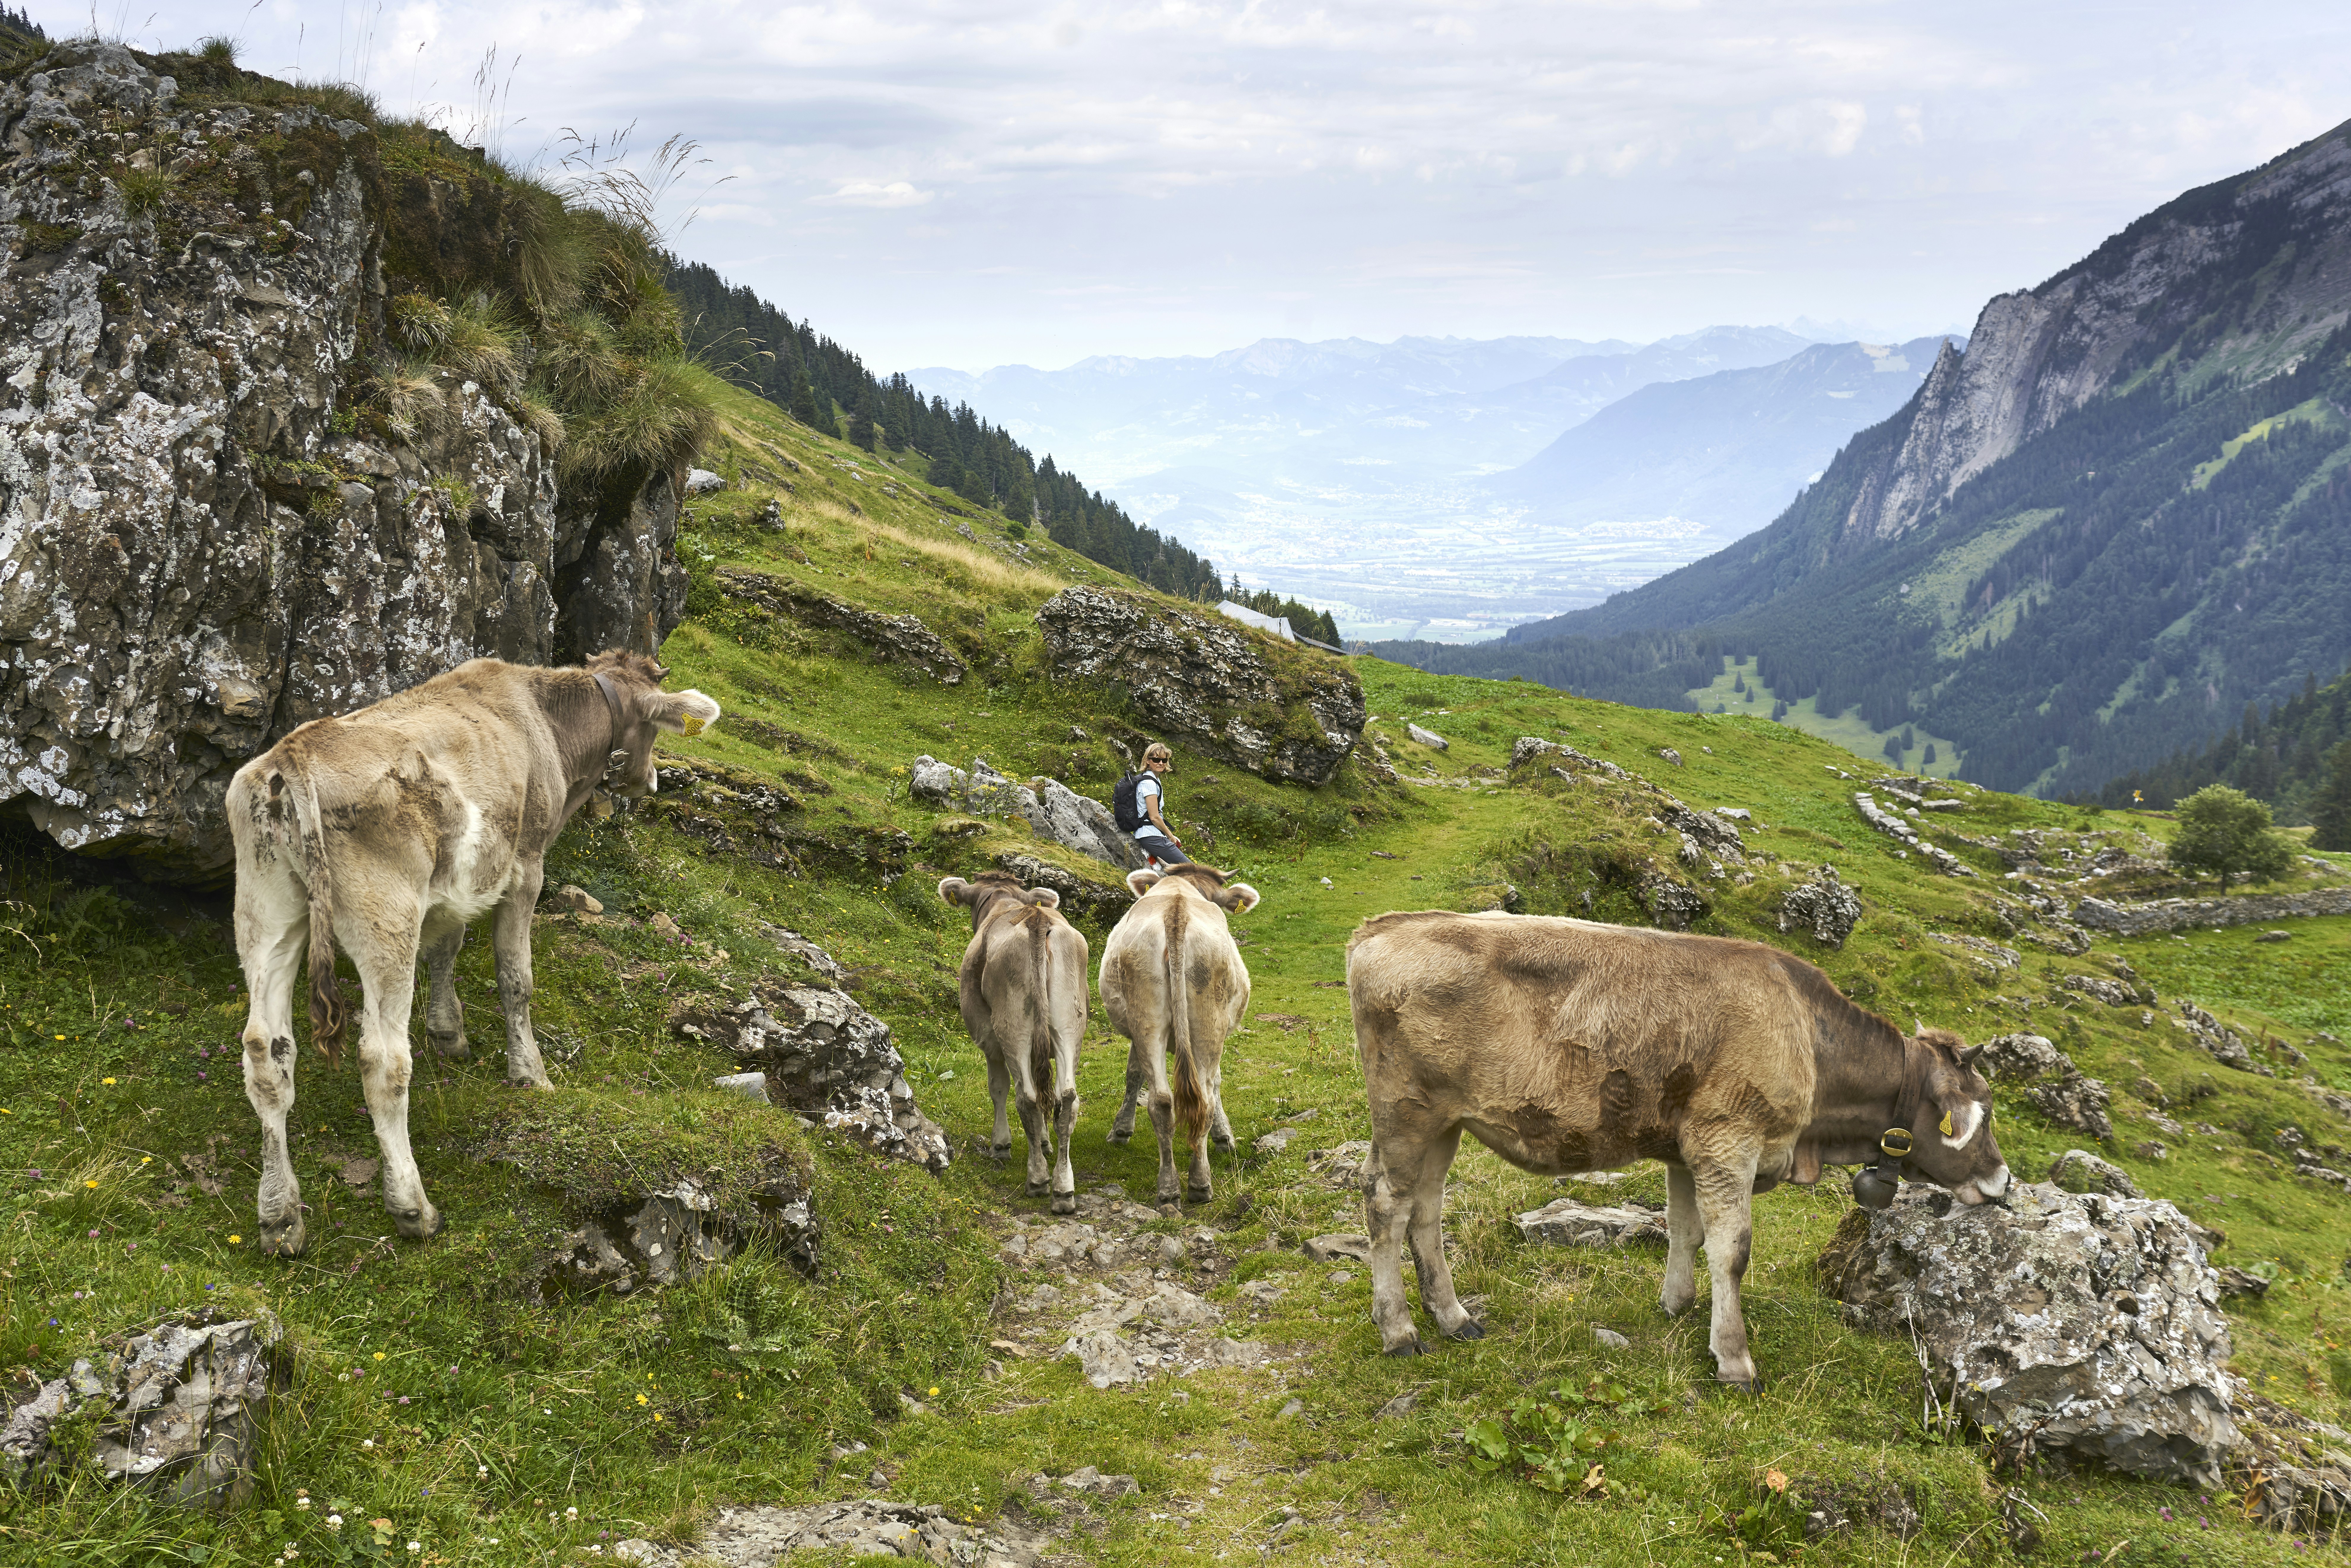 Young cows near the Voralpsee, Kanton St. Gall, Switzerland.